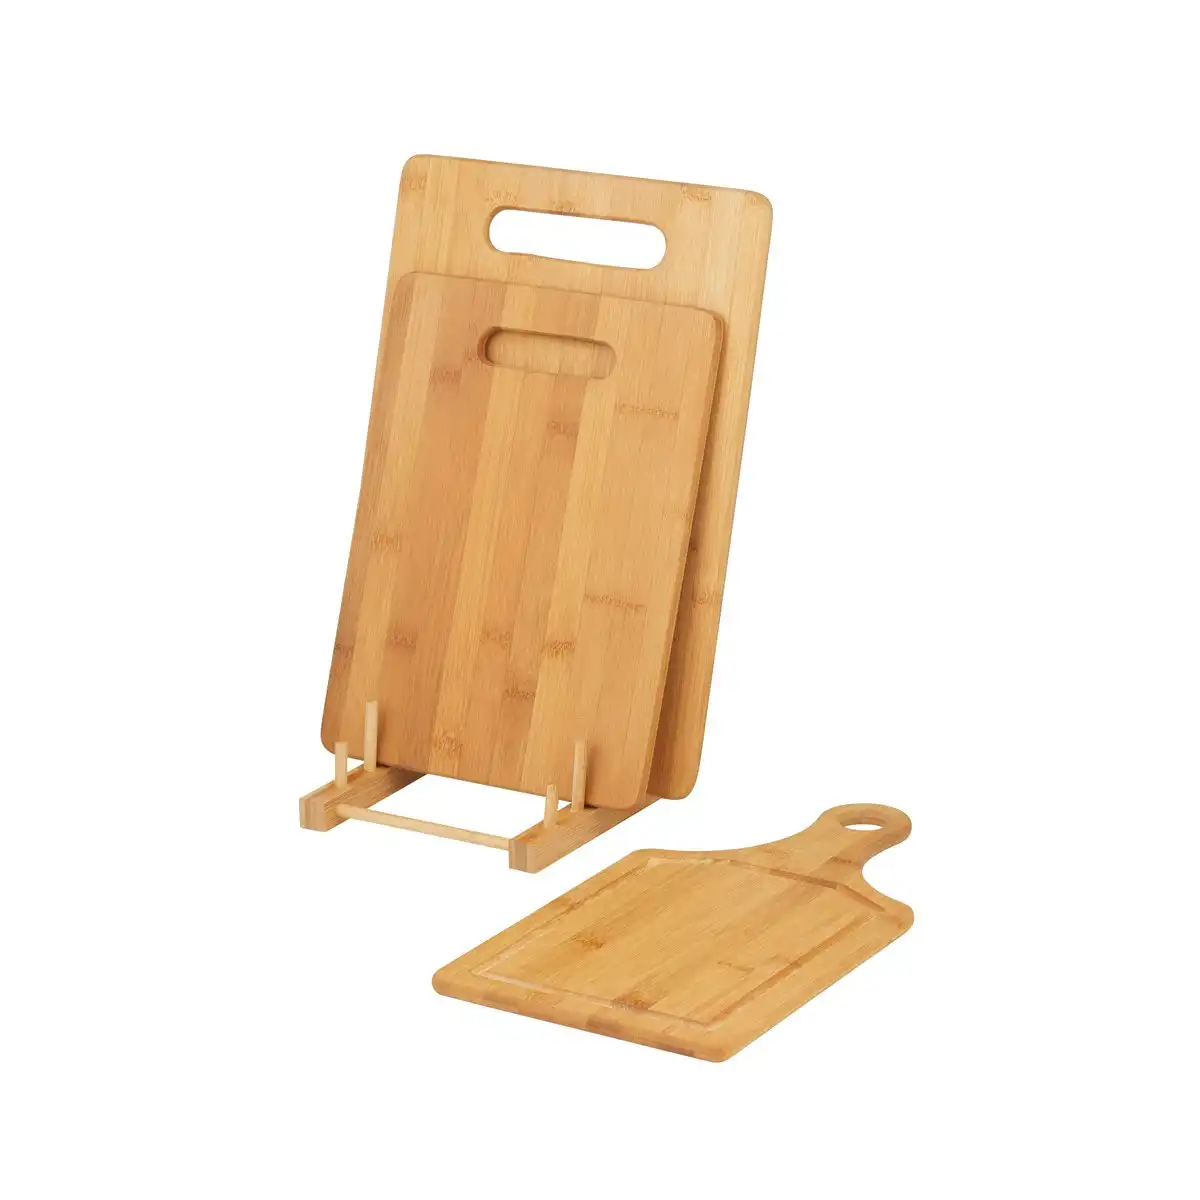 Davis & Waddell 4 Piece Bamboo Cutting Board Set with Stand - Natural